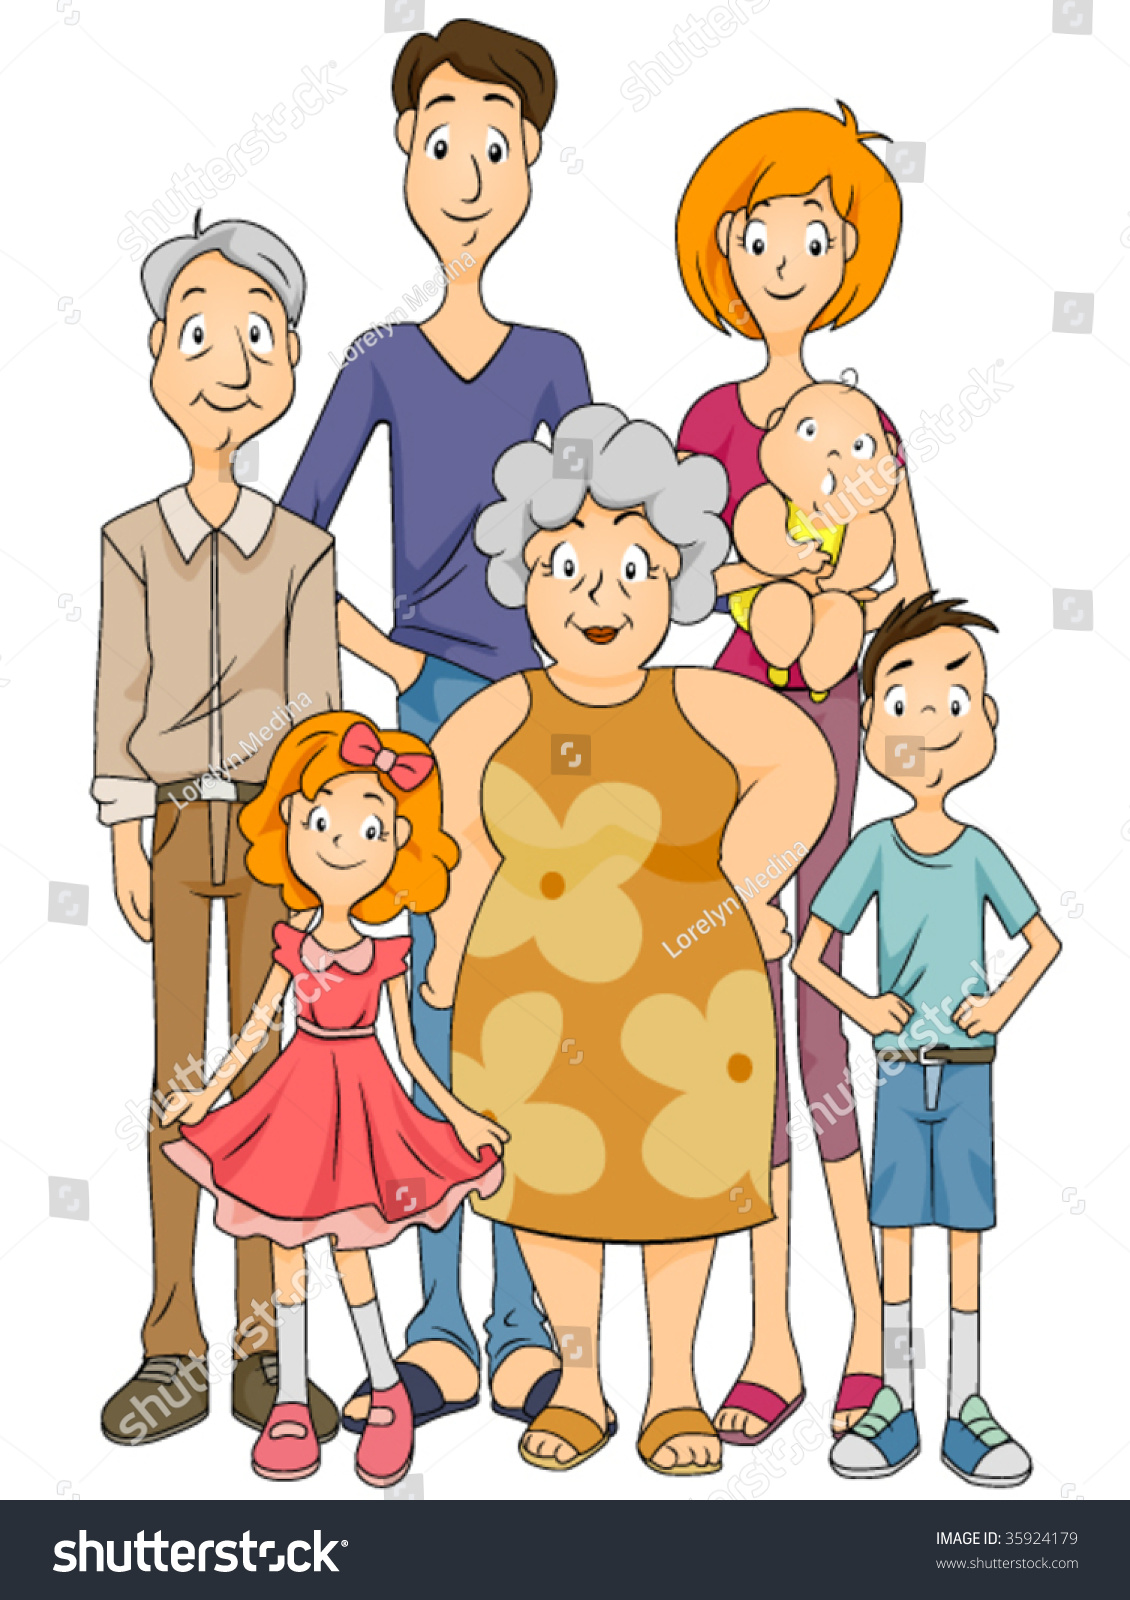 clipart of nuclear family - photo #38